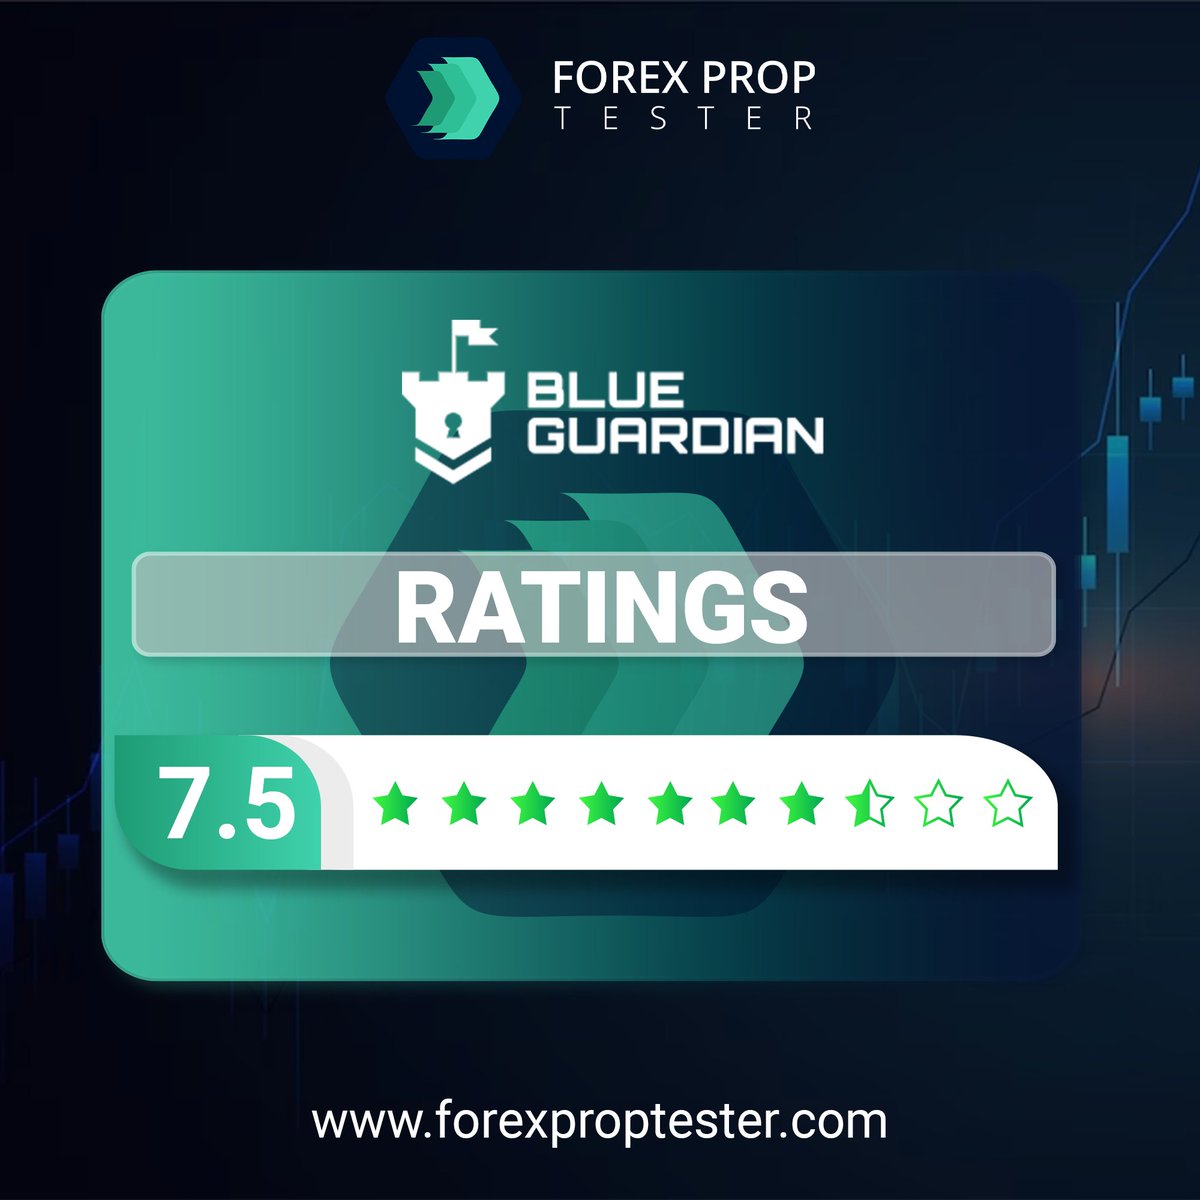 🎉 Exciting news! Our listed prop firm, Blue Guardian has received a stellar 7.5-star rating from our experts. This is a testament to their exceptional services and commitment to their traders. Head over to our website now to read reviews. 💰
#PropFirms #ForexPropReviews #Ratings